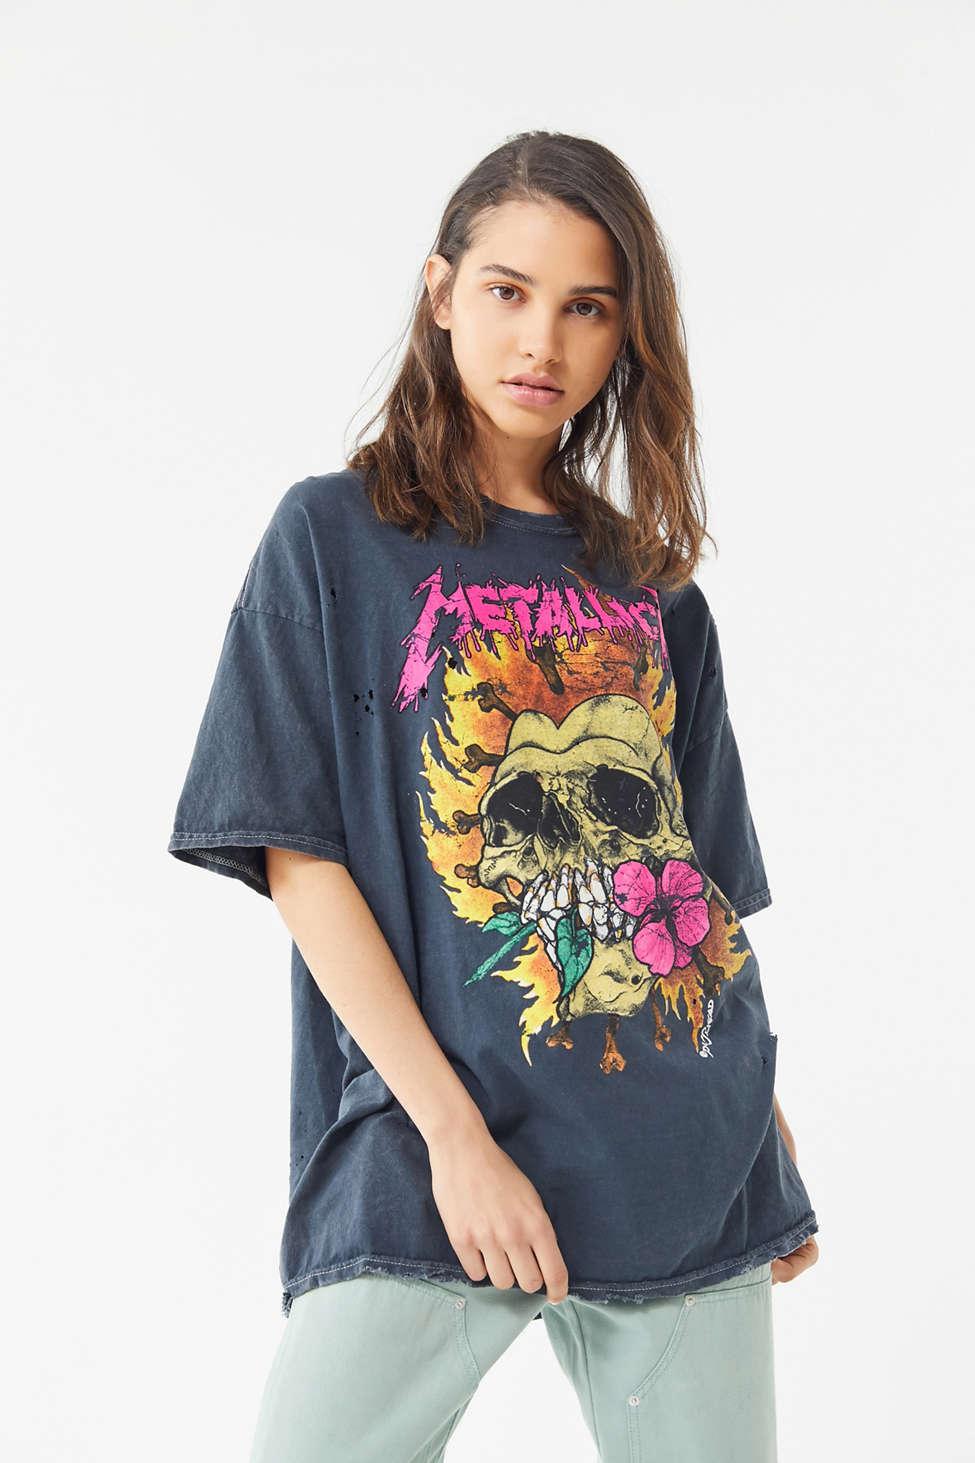 Urban Outfitters Cotton Metallica T-shirt Dress in Black | Lyst Canada